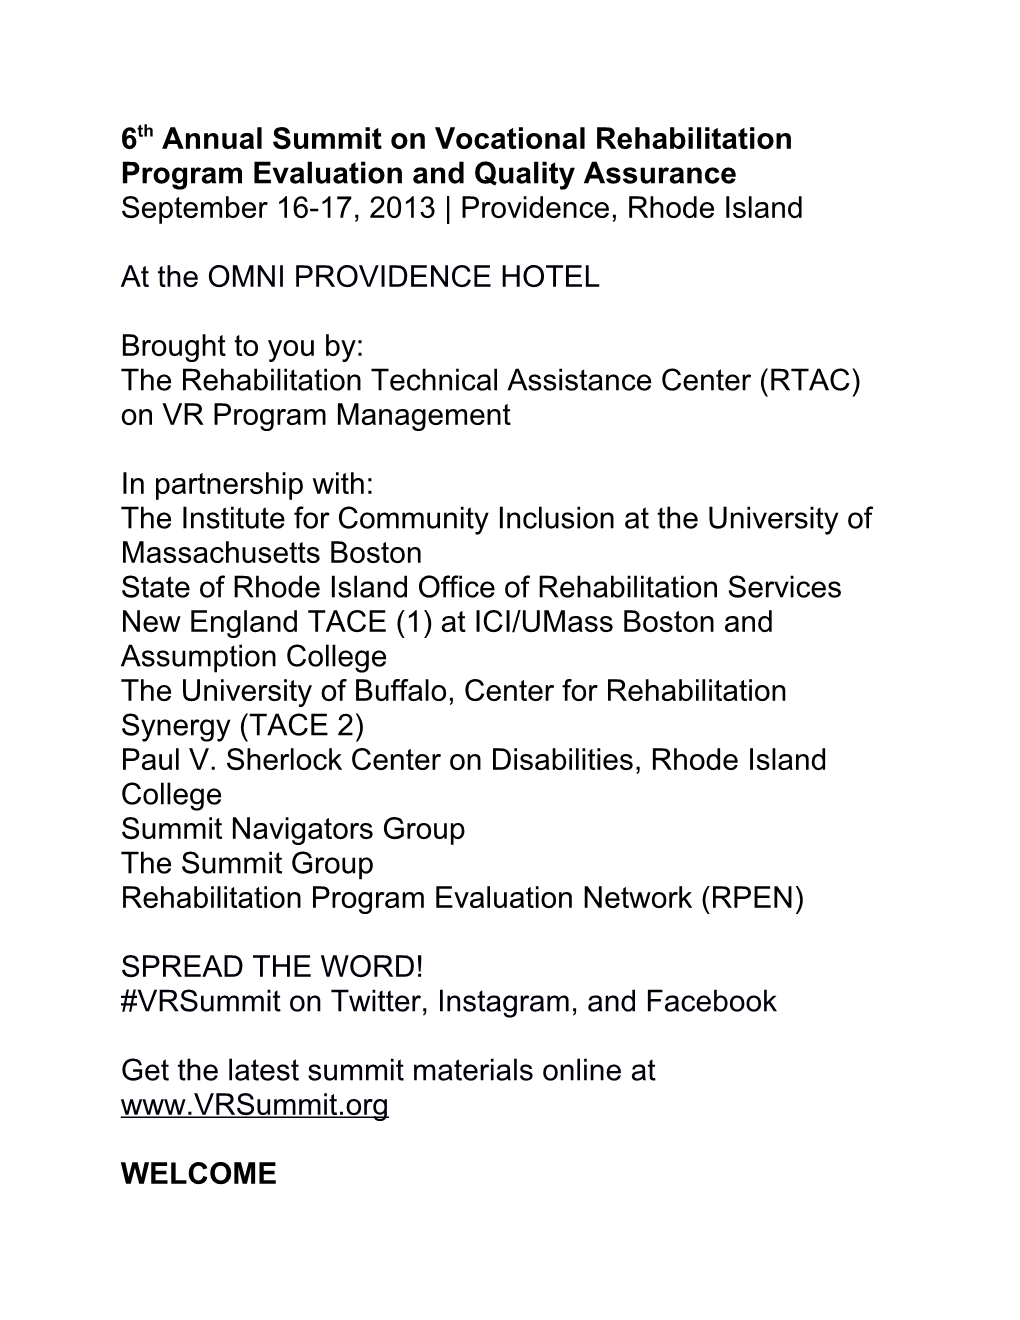 6Th Annual Summit on Vocational Rehabilitation Program Evaluation and Quality Assurance